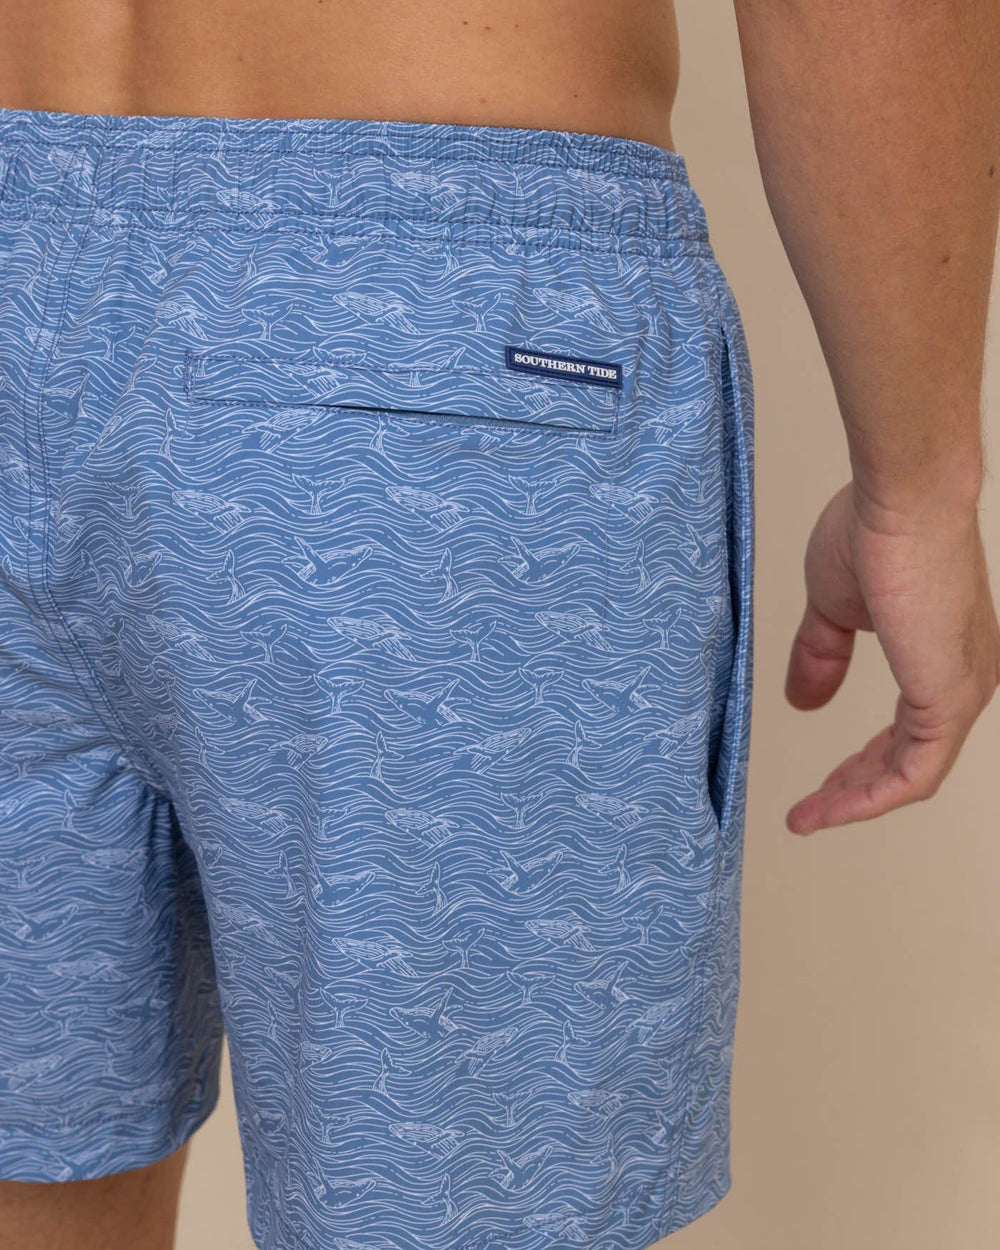 The detail view of the Southern Tide The Whaler Swim Trunk by Southern Tide - Coronet Blue